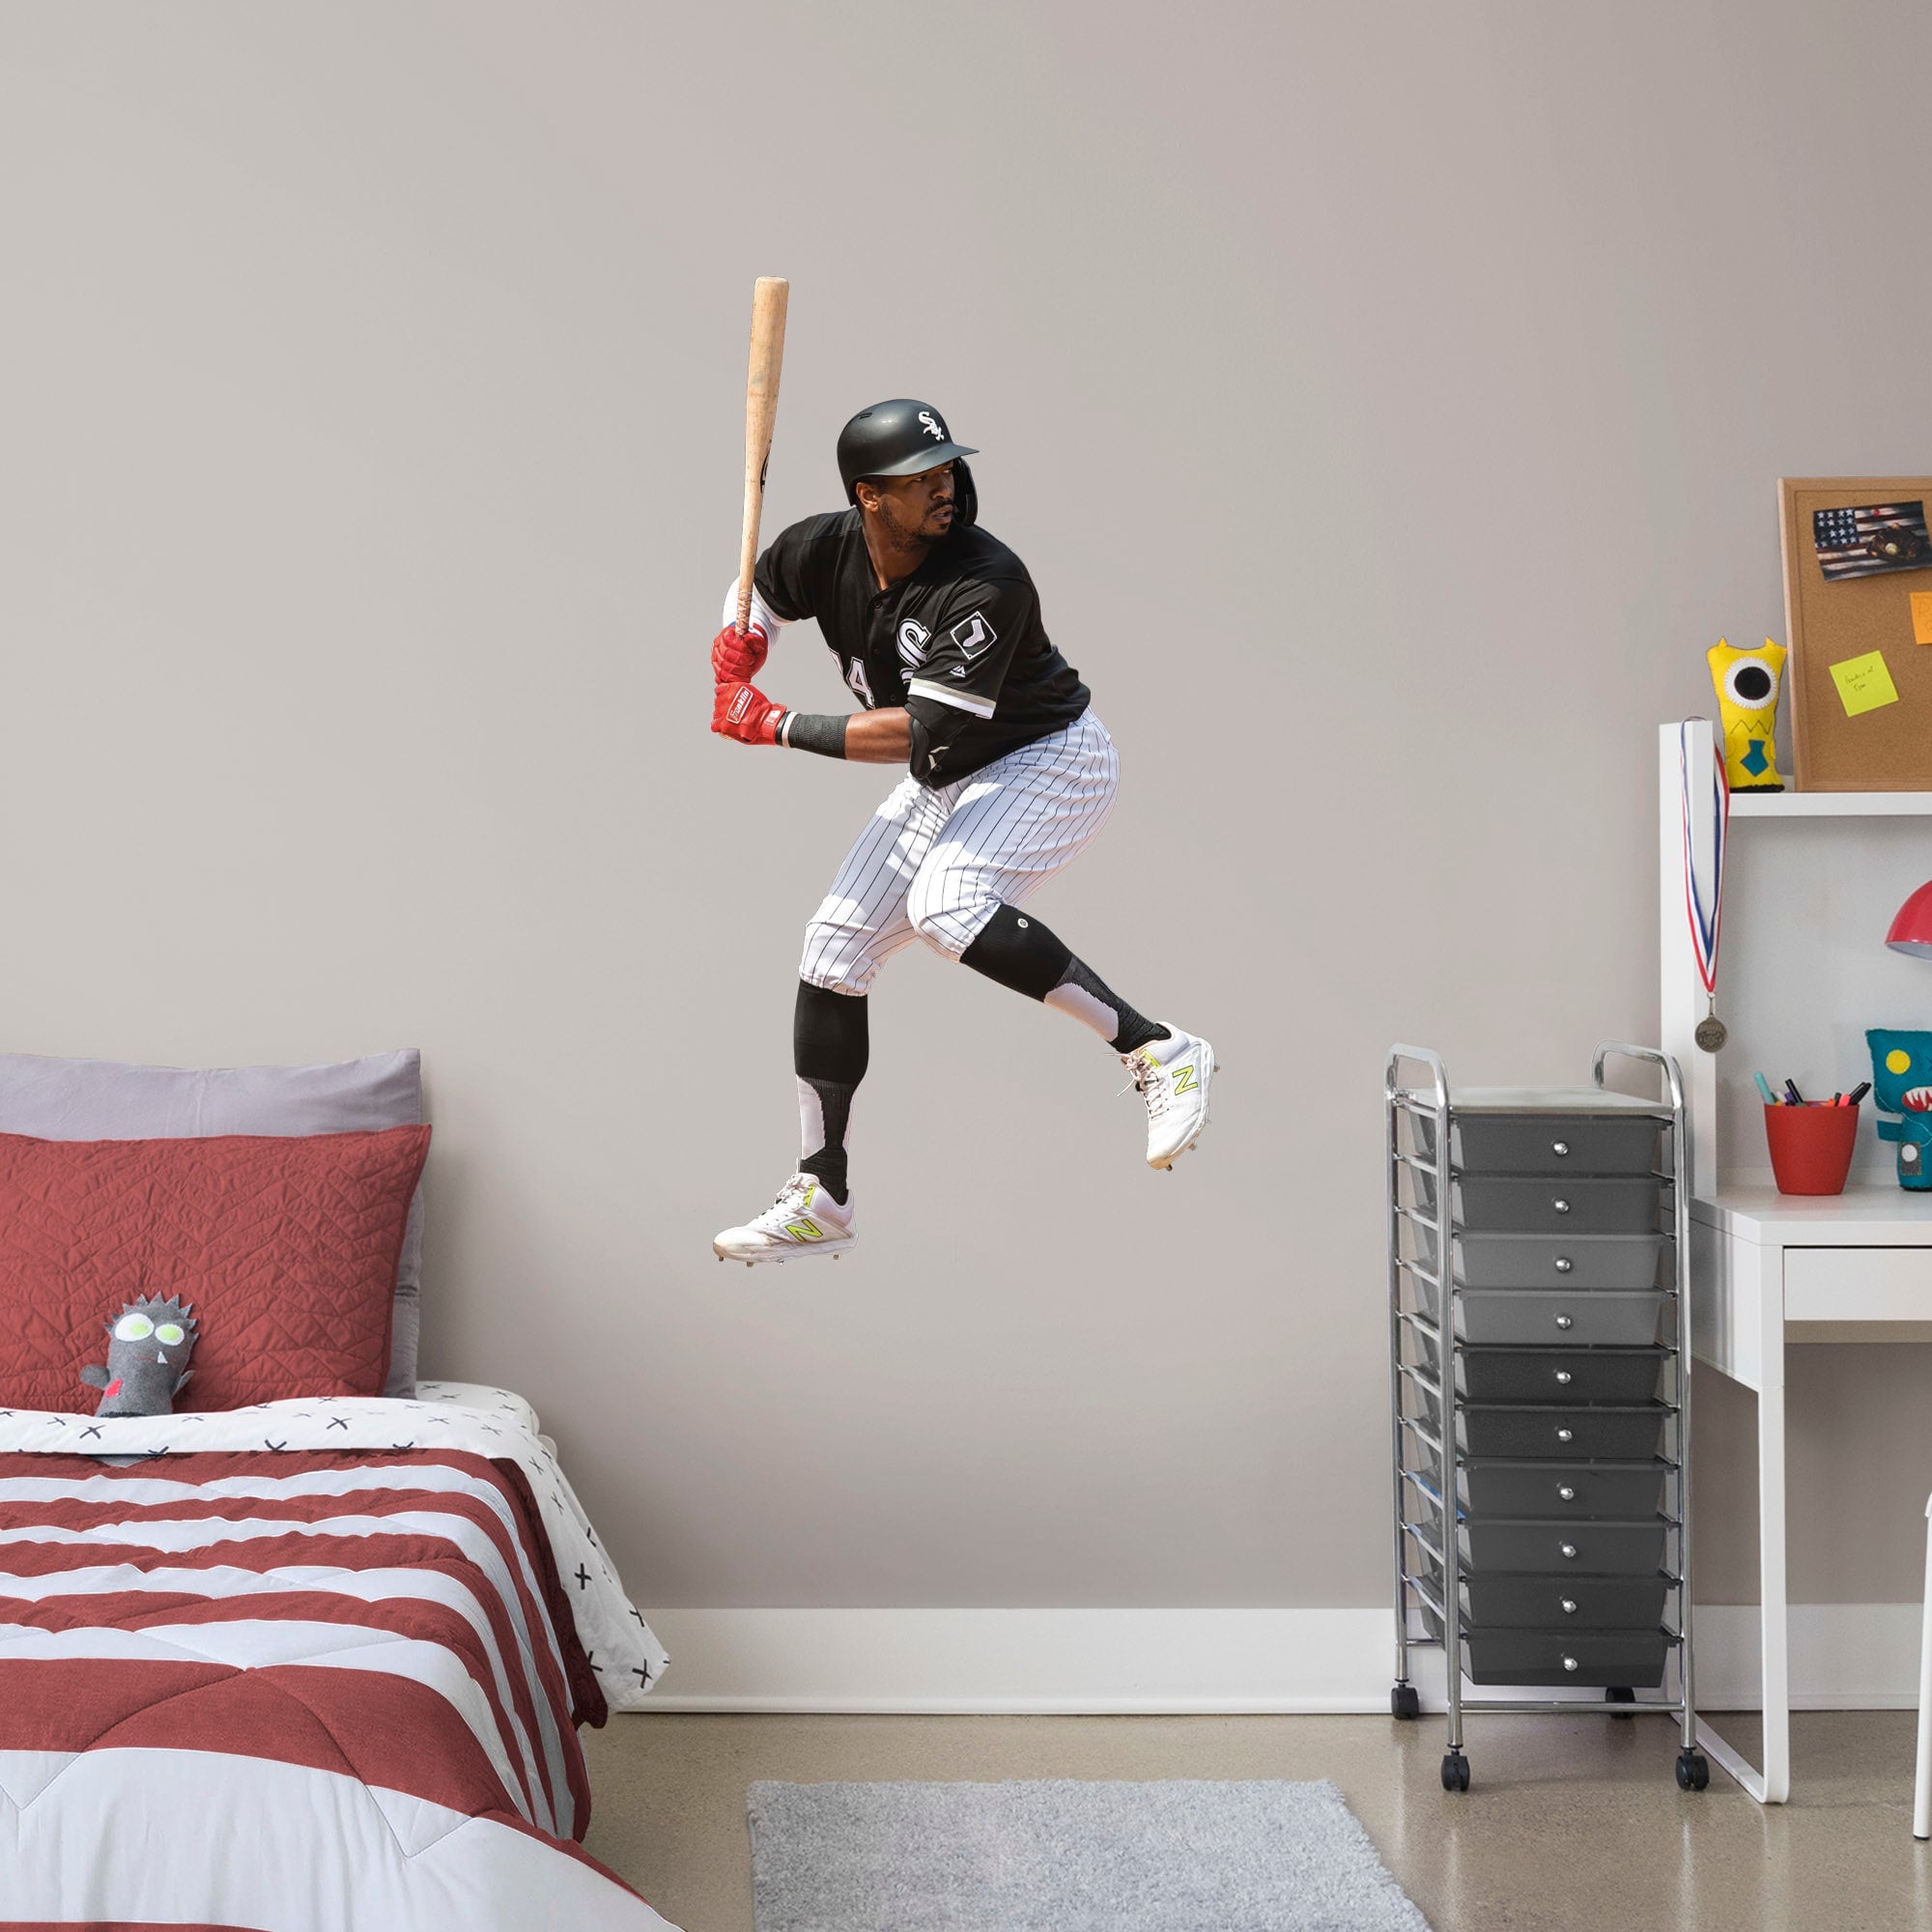 Eloy Jimenez for Chicago White Sox - Officially Licensed MLB Removable Wall Decal Giant Athlete + 2 Decals (26"W x 51"H) by Fath